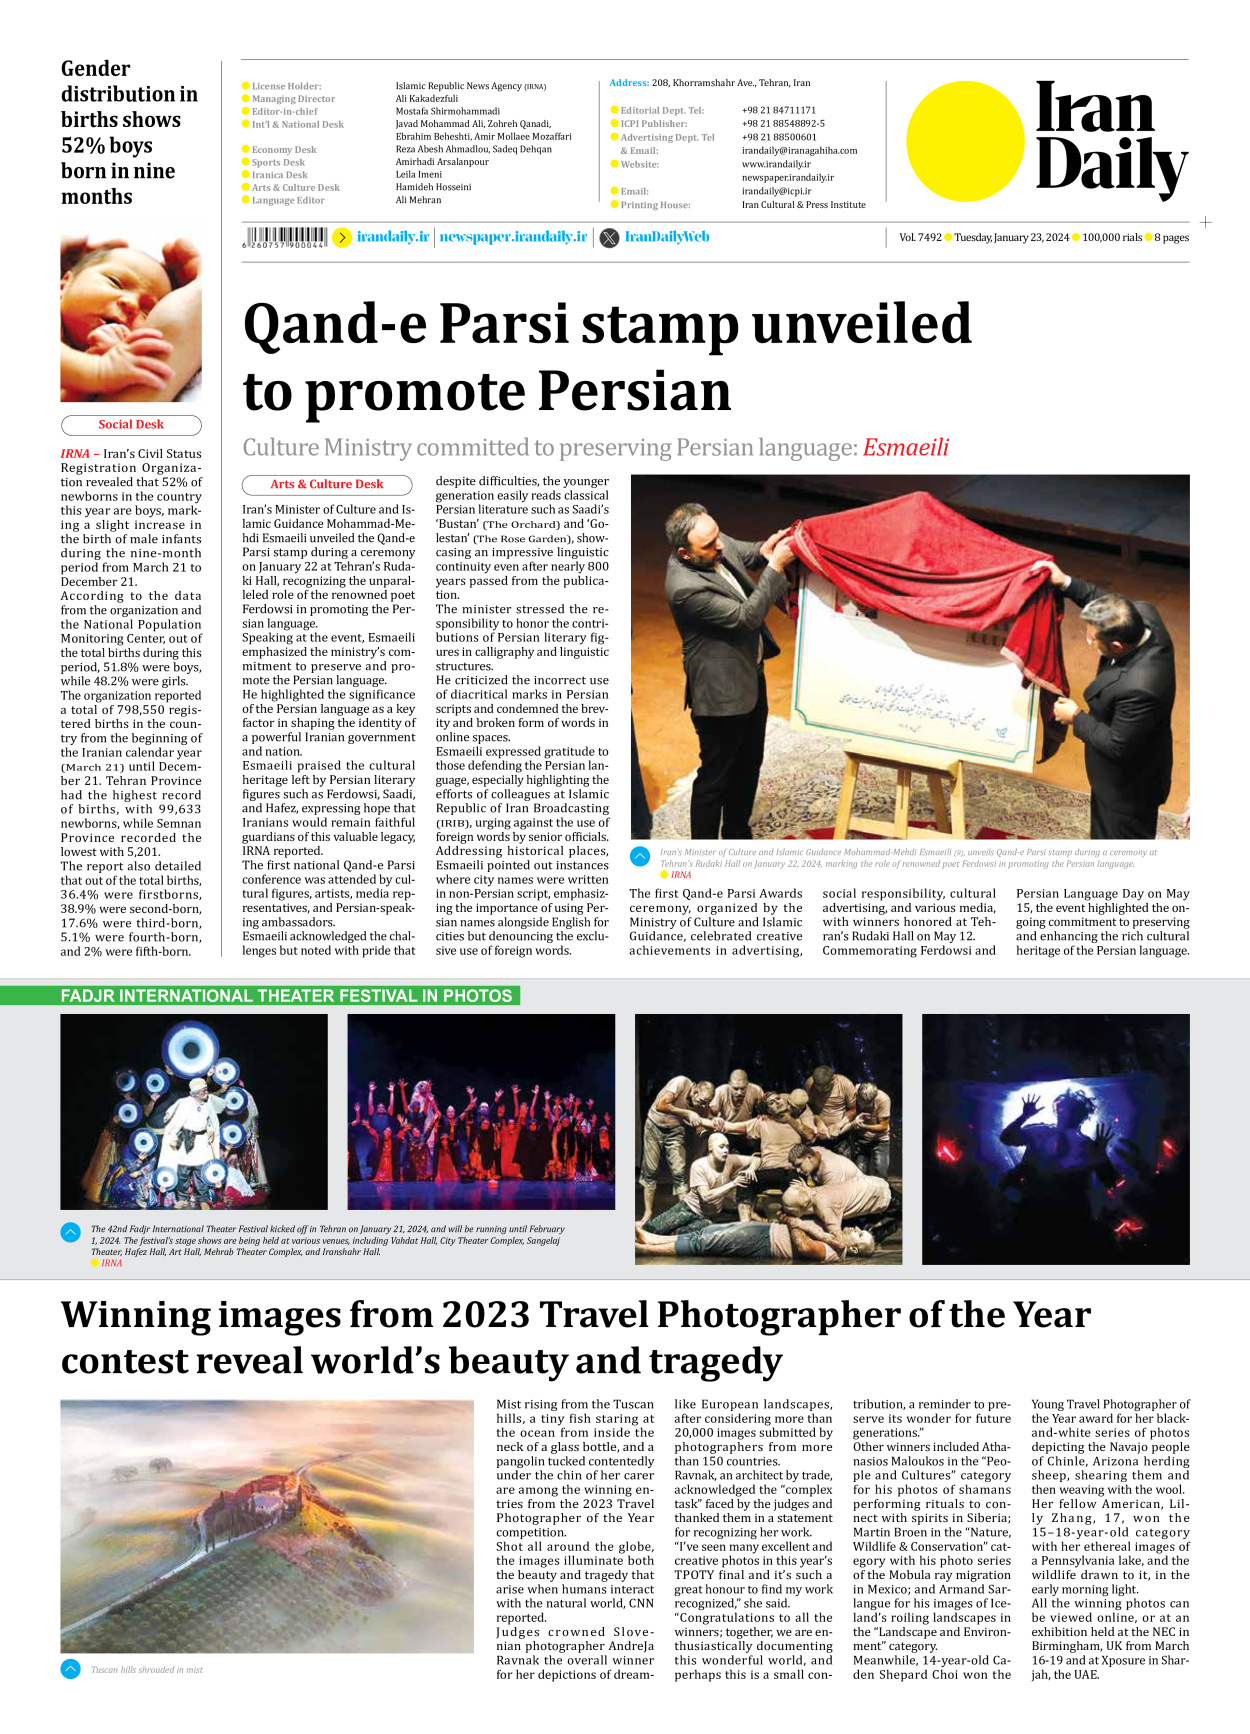 Iran Daily - Number Seven Thousand Four Hundred and Ninety Two - 23 January 2024 - Page 8